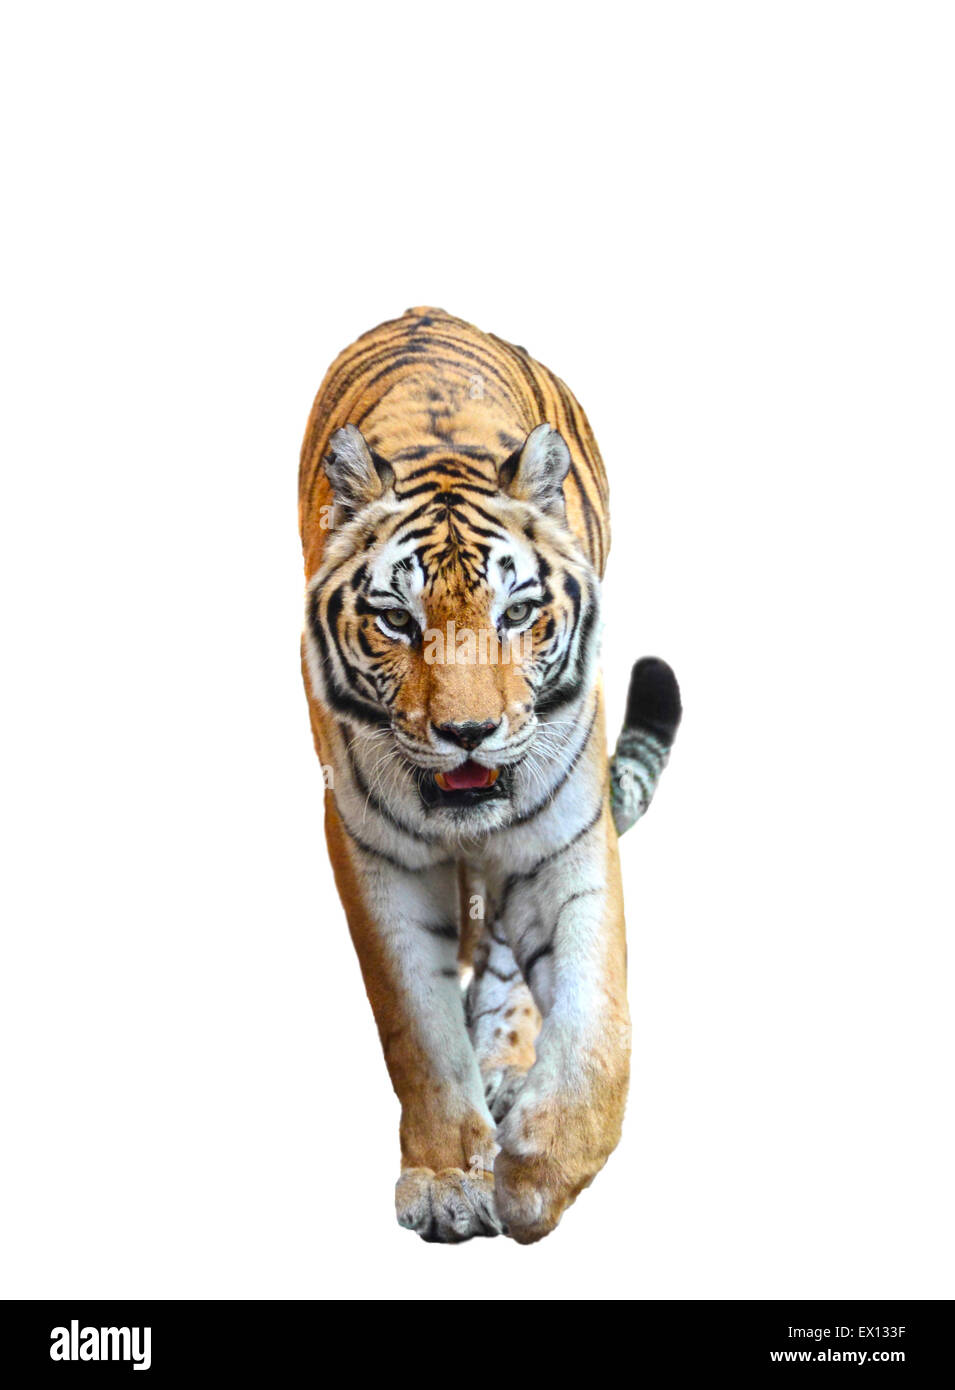 Tiger walking isolated on a white background Stock Photo